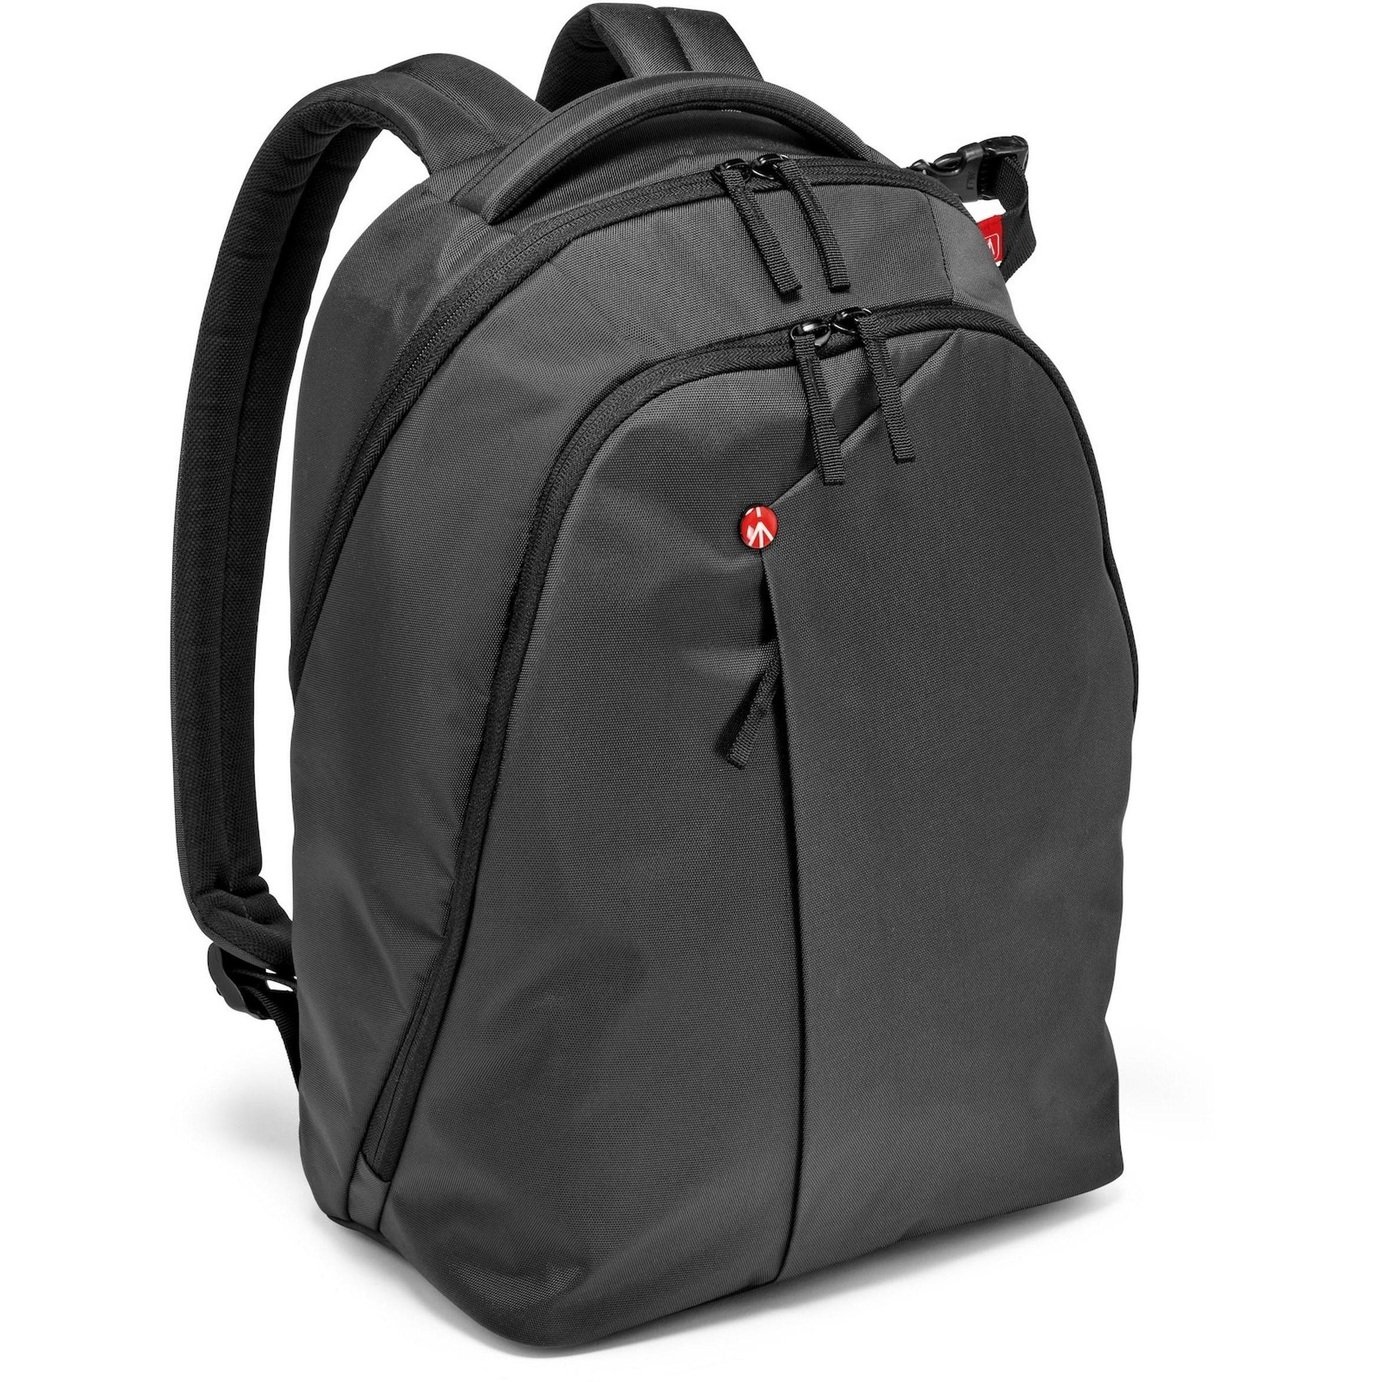 Manfrotto NX DLSR Camera Backpack - Grey